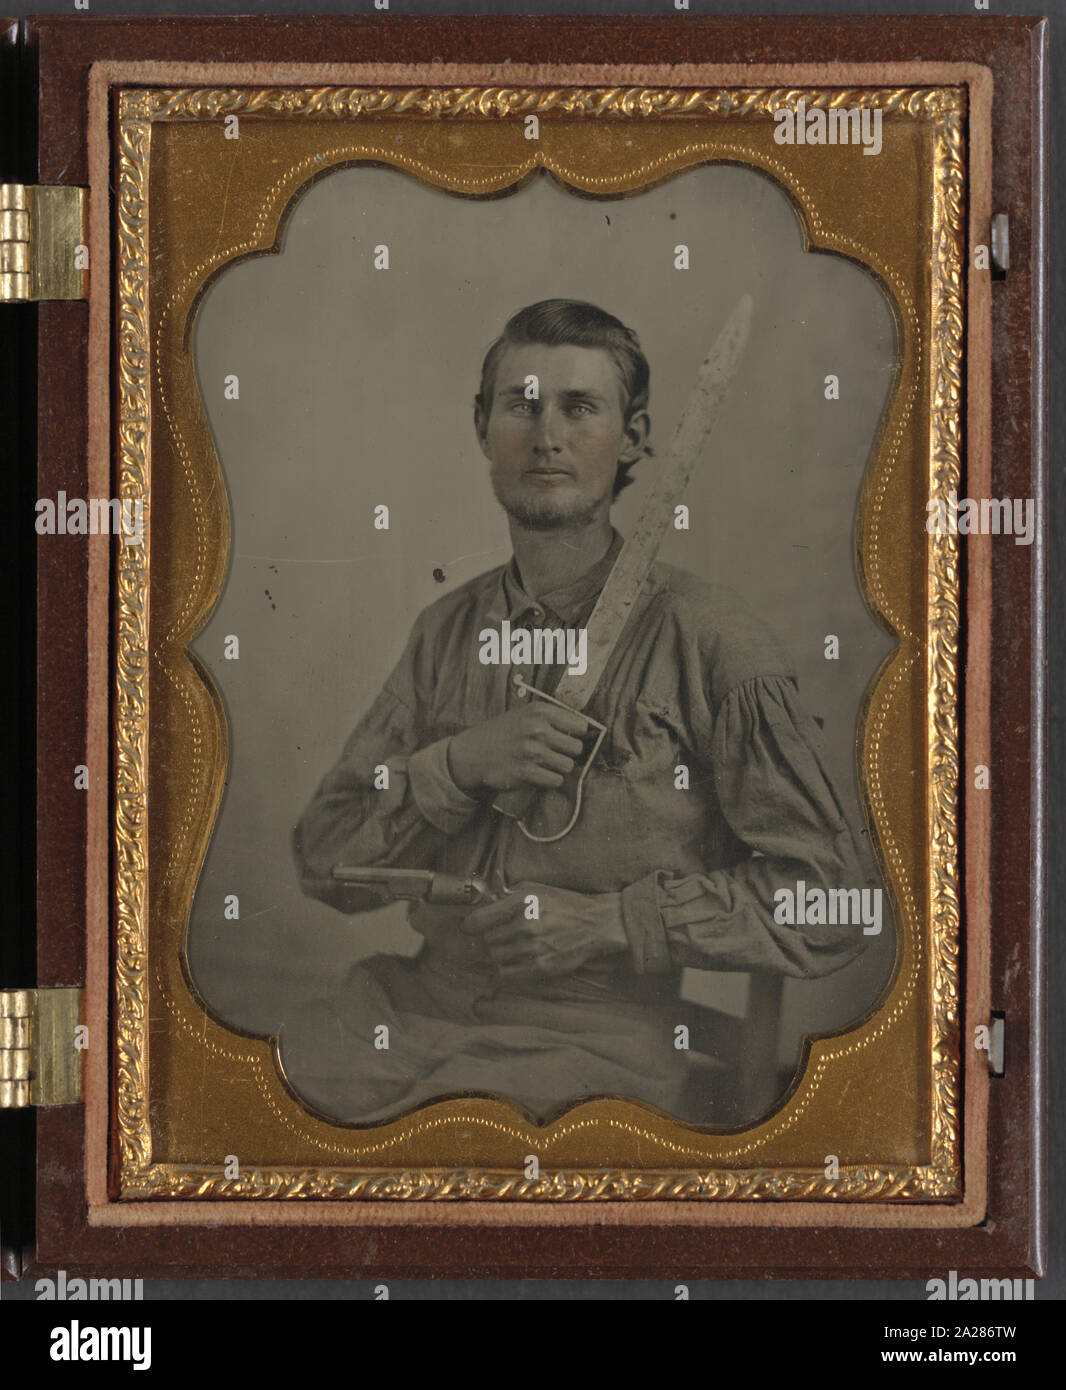 Private Simeon J. Crews of Co. F, 7th Texas Cavalry Regiment, with cut down saber and revolver Stock Photo